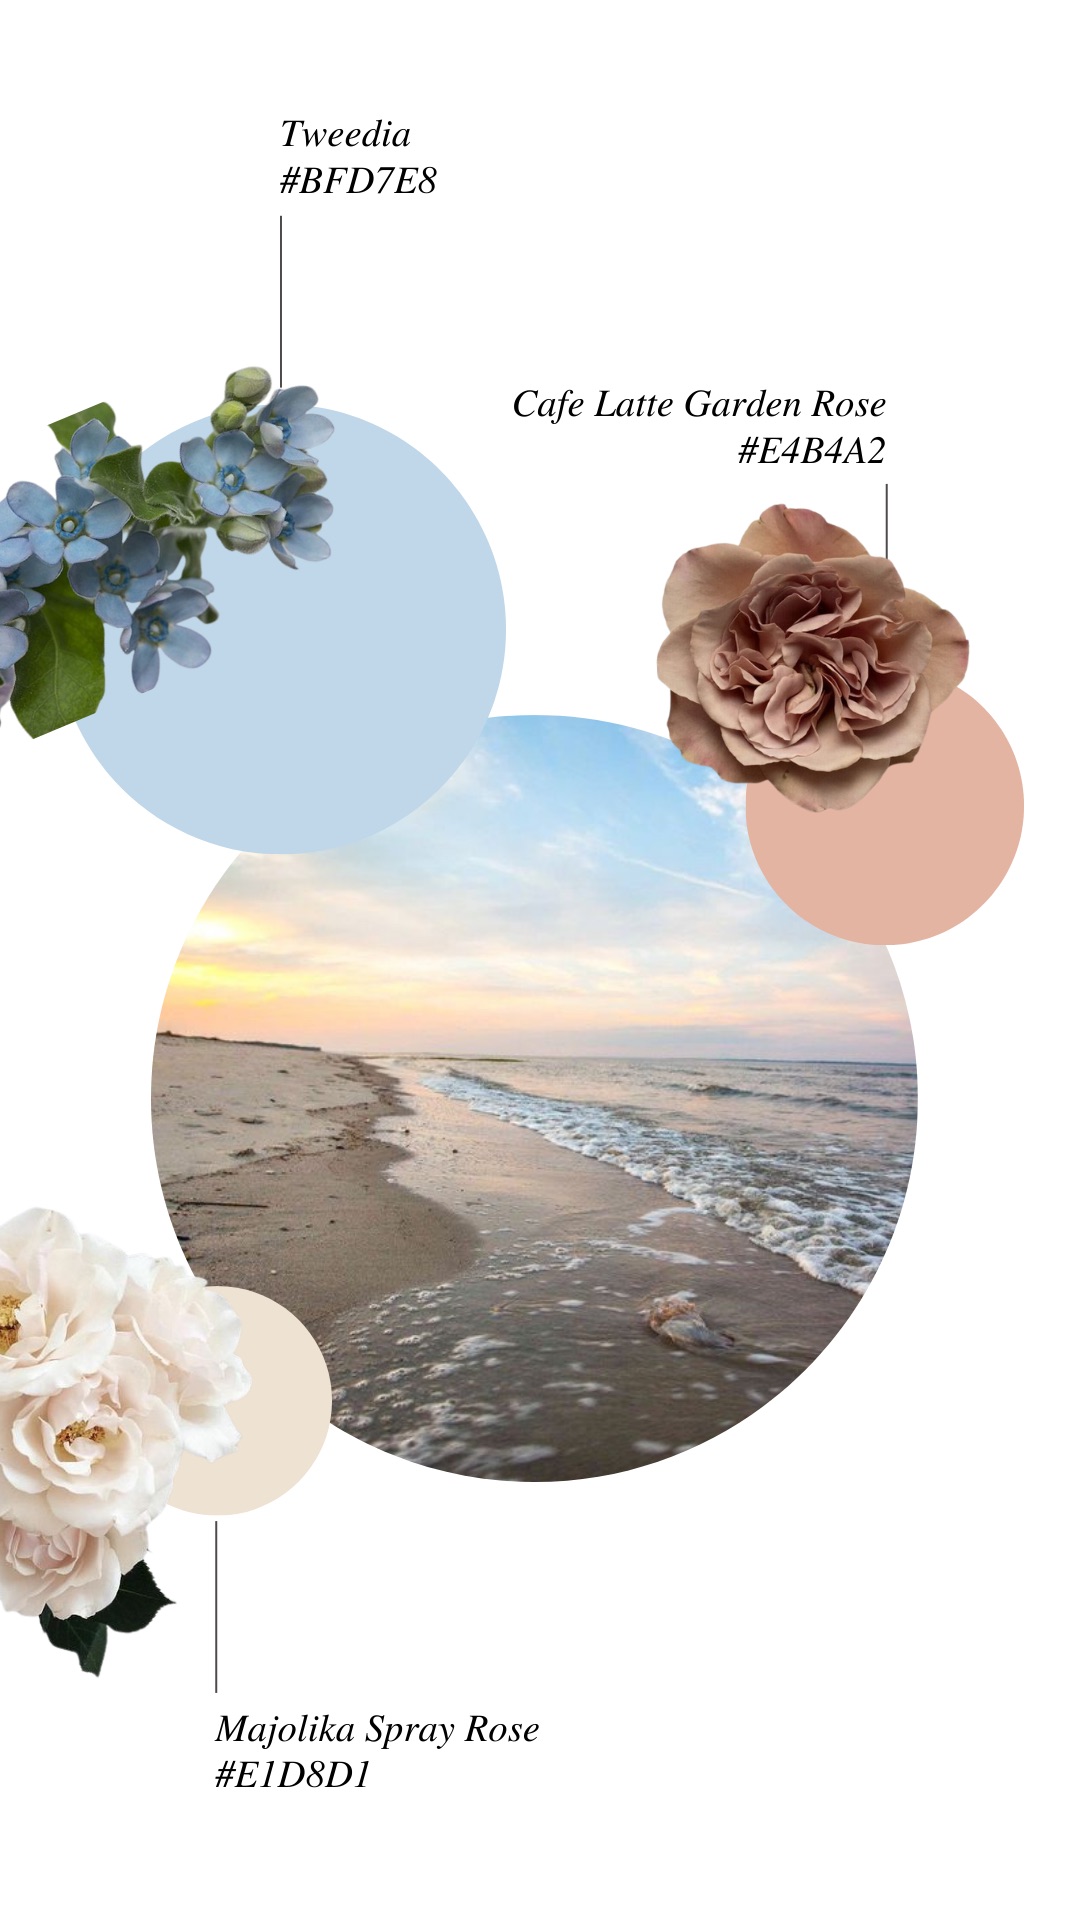 Hilton Head wedding color palette with pinks and blues